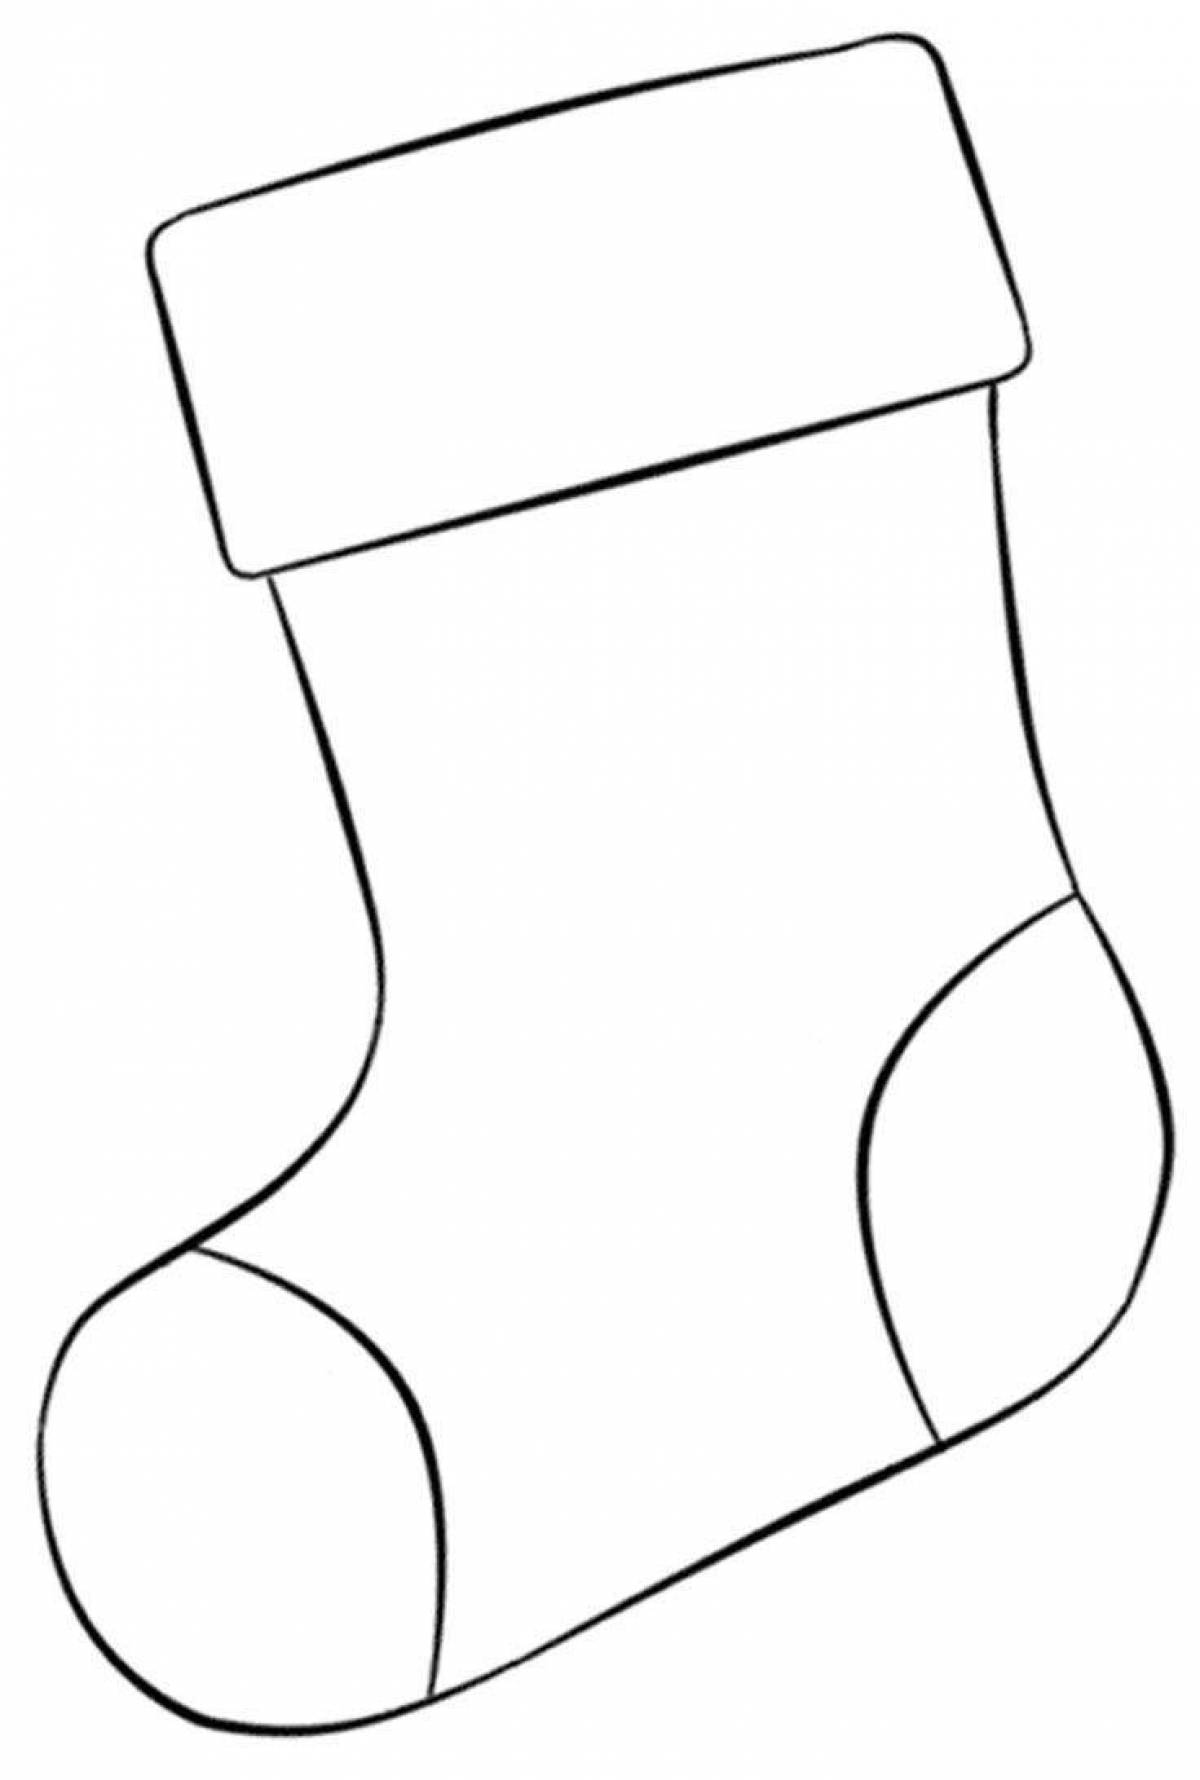 Character boots coloring page